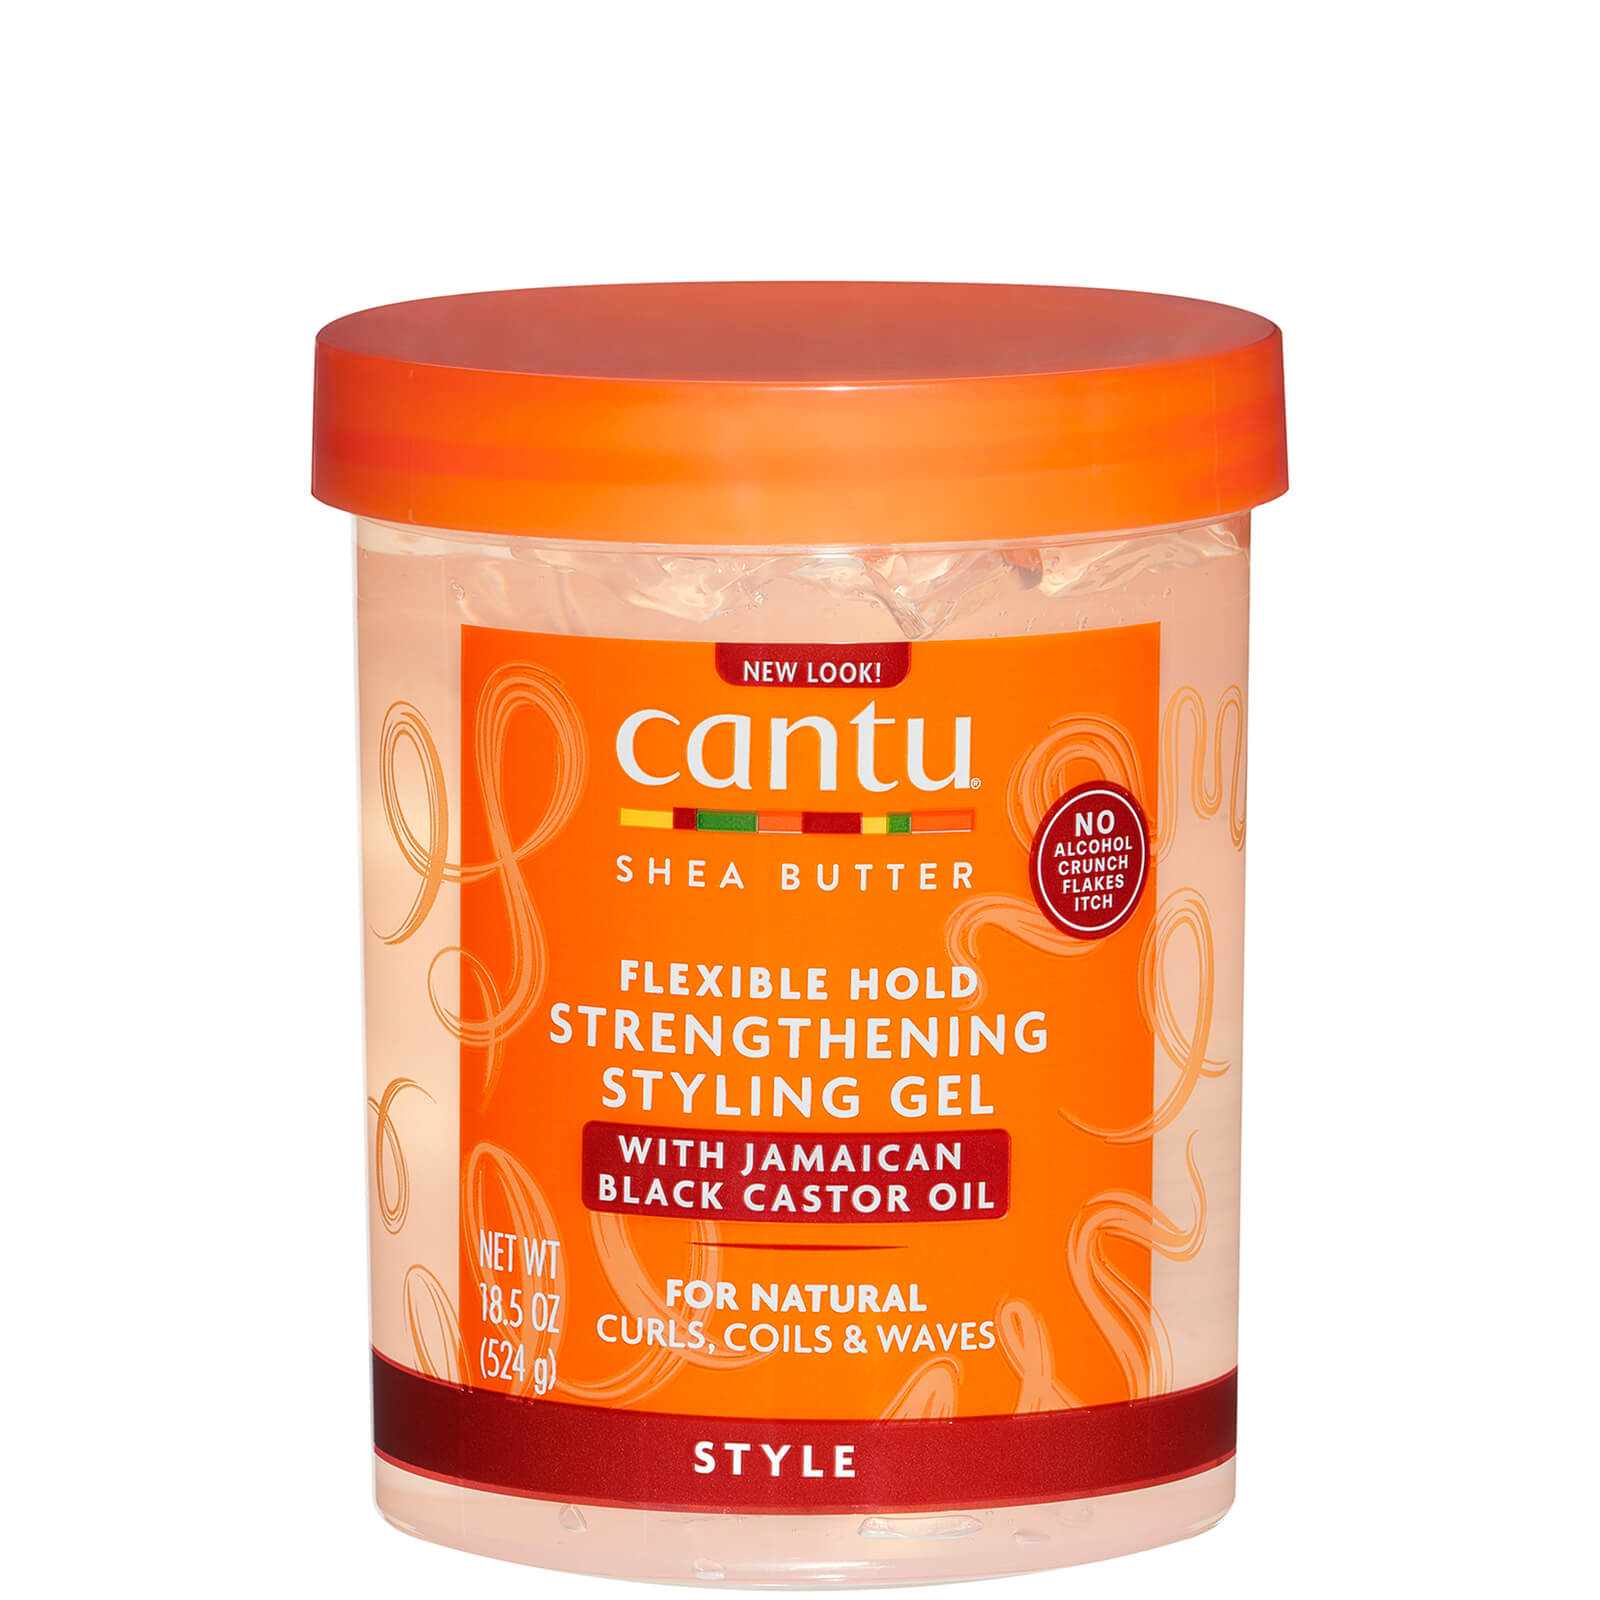 Image of Cantu Shea Butter Maximum Hold Strengthening Styling Gel con Jamaican Black Castor Oil 18.5 oz